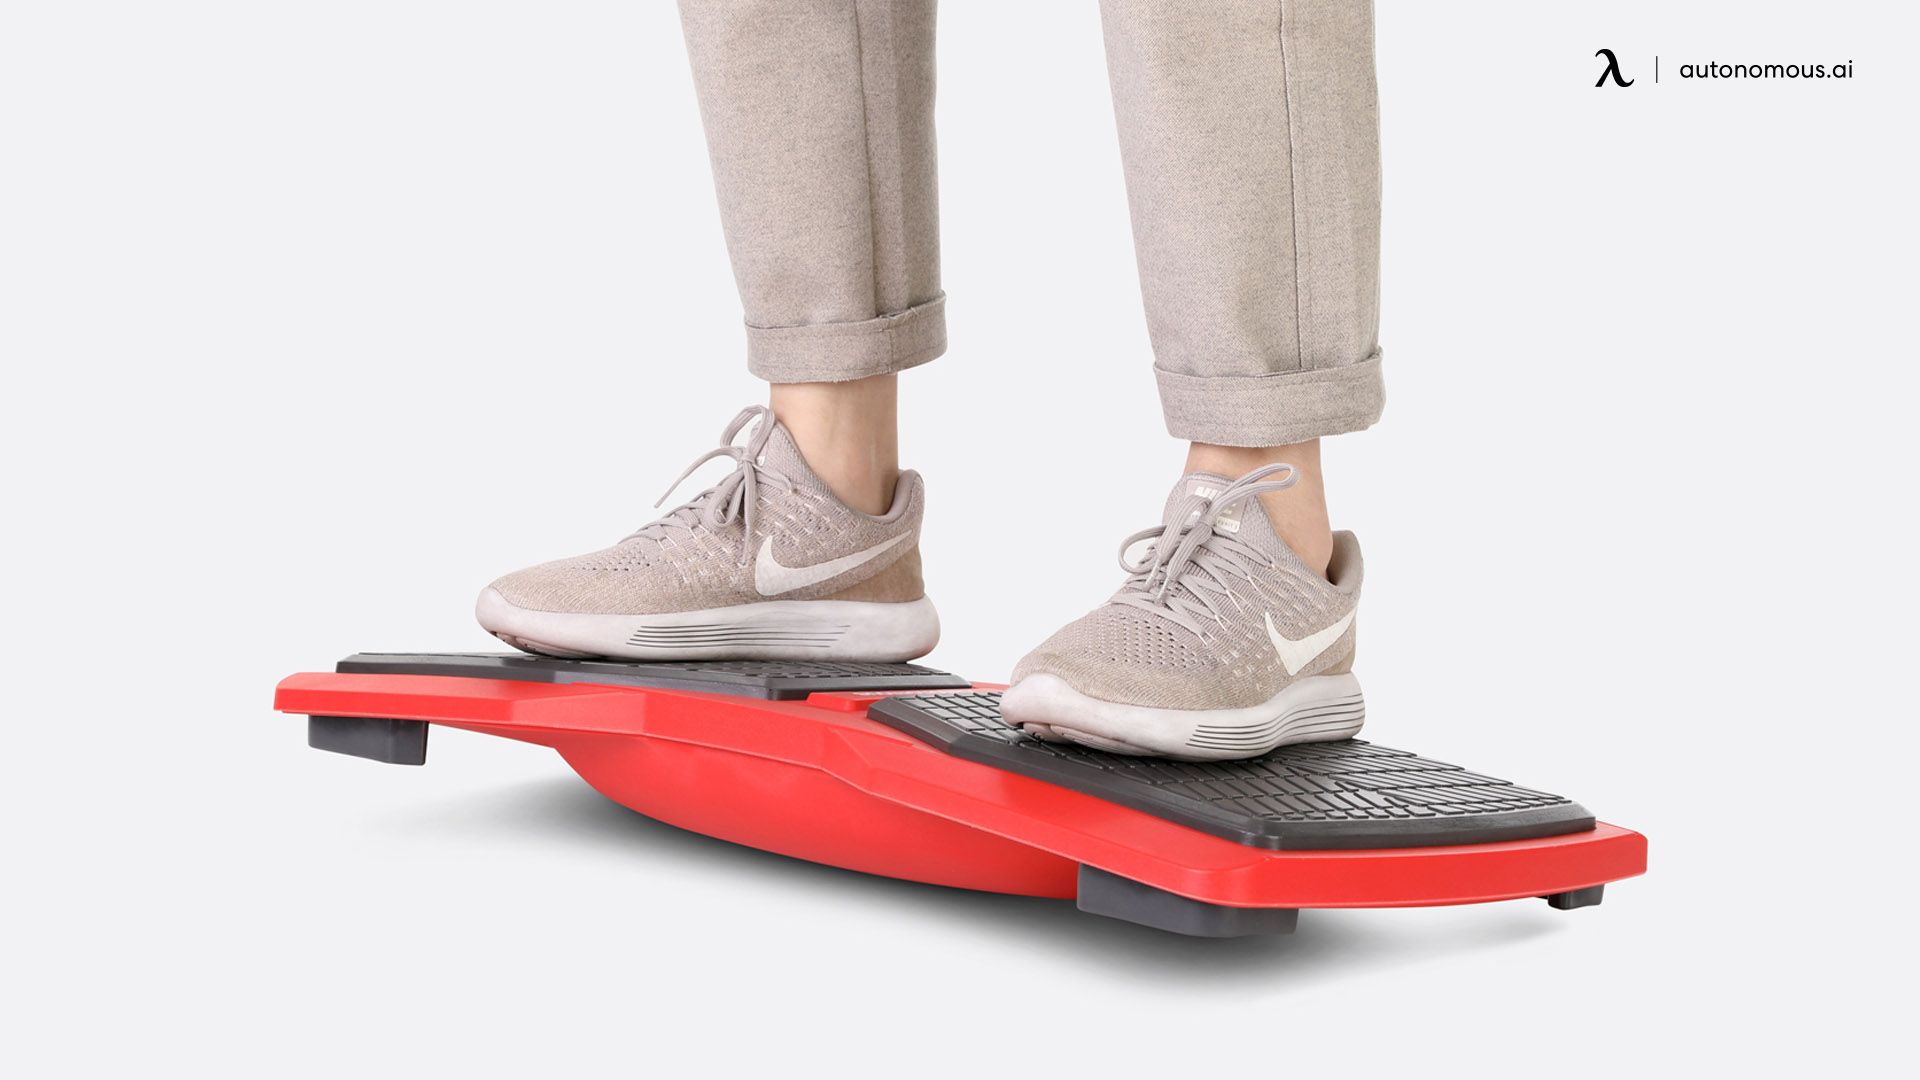 Balance Boards: What Are They